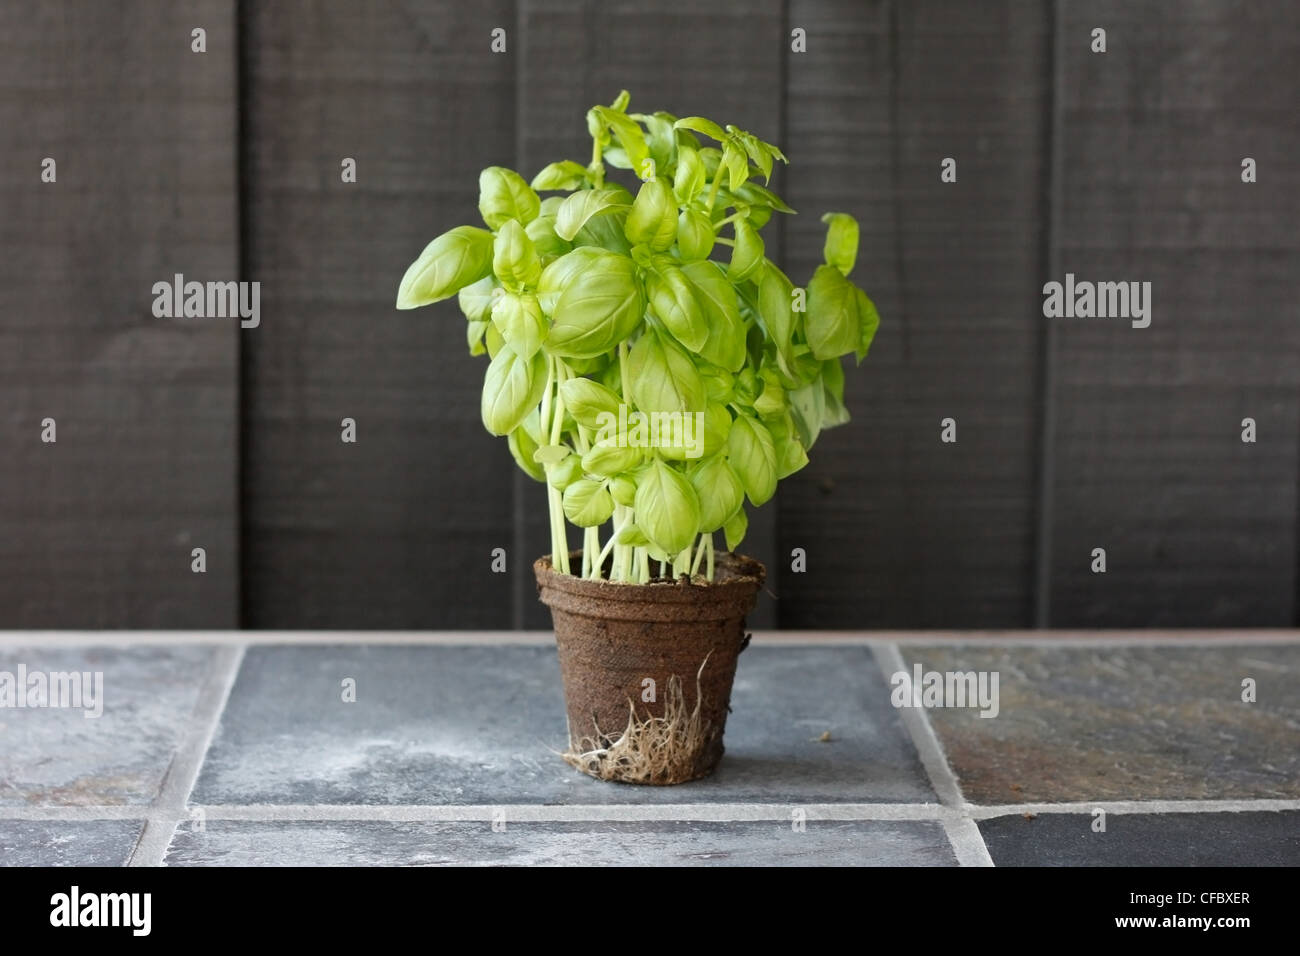 Basil in an outside kitchen Stock Photo